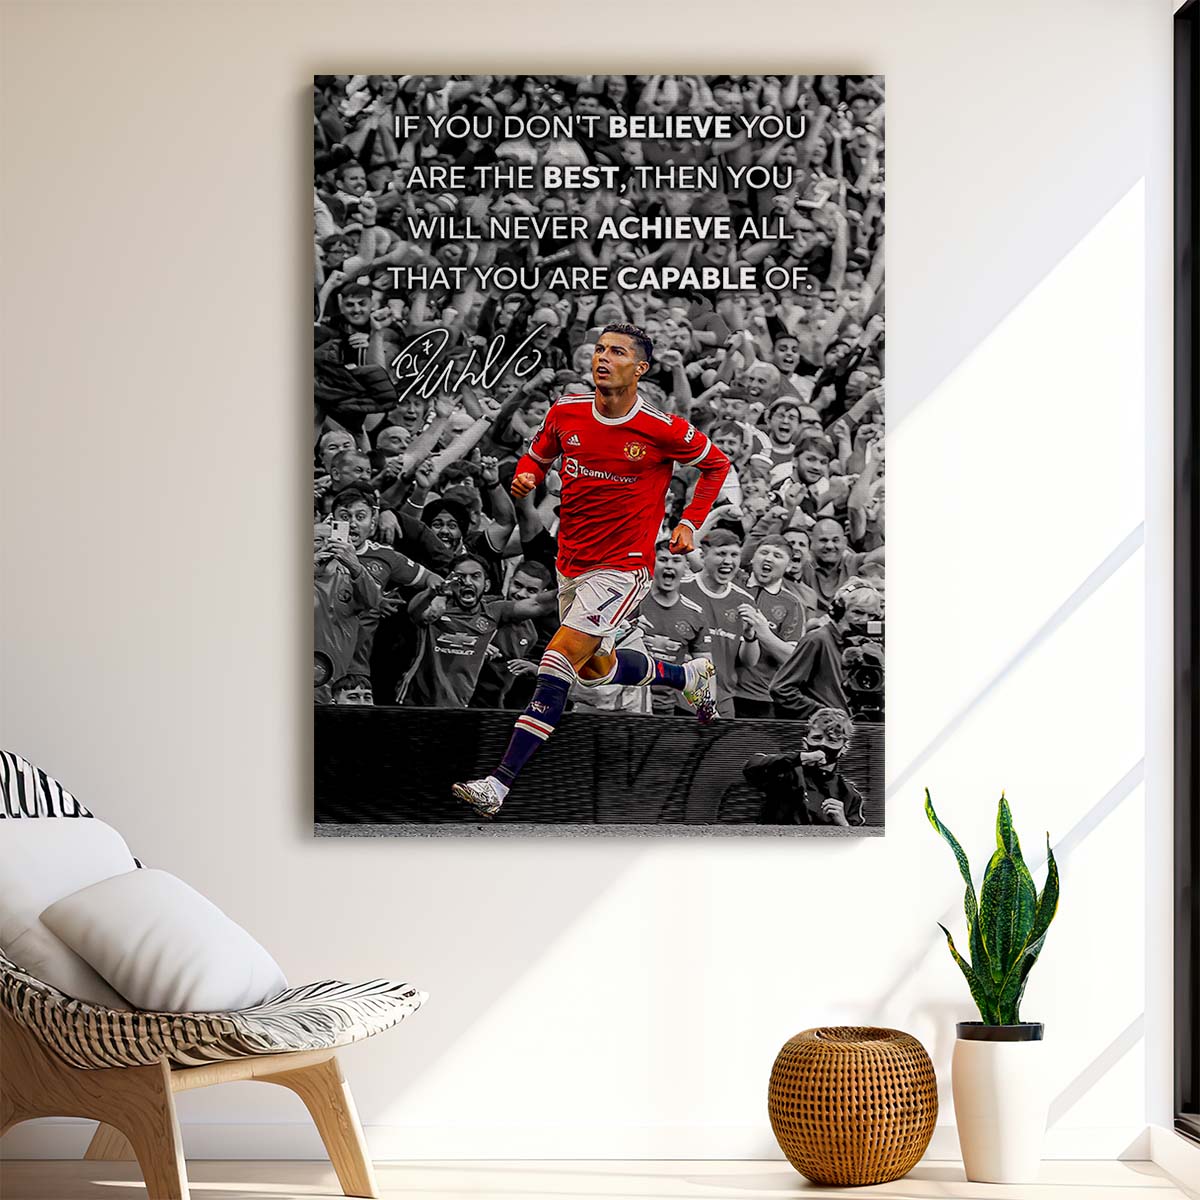 Ronaldo Believe in Yourself Wall Art by Luxuriance Designs. Made in USA.